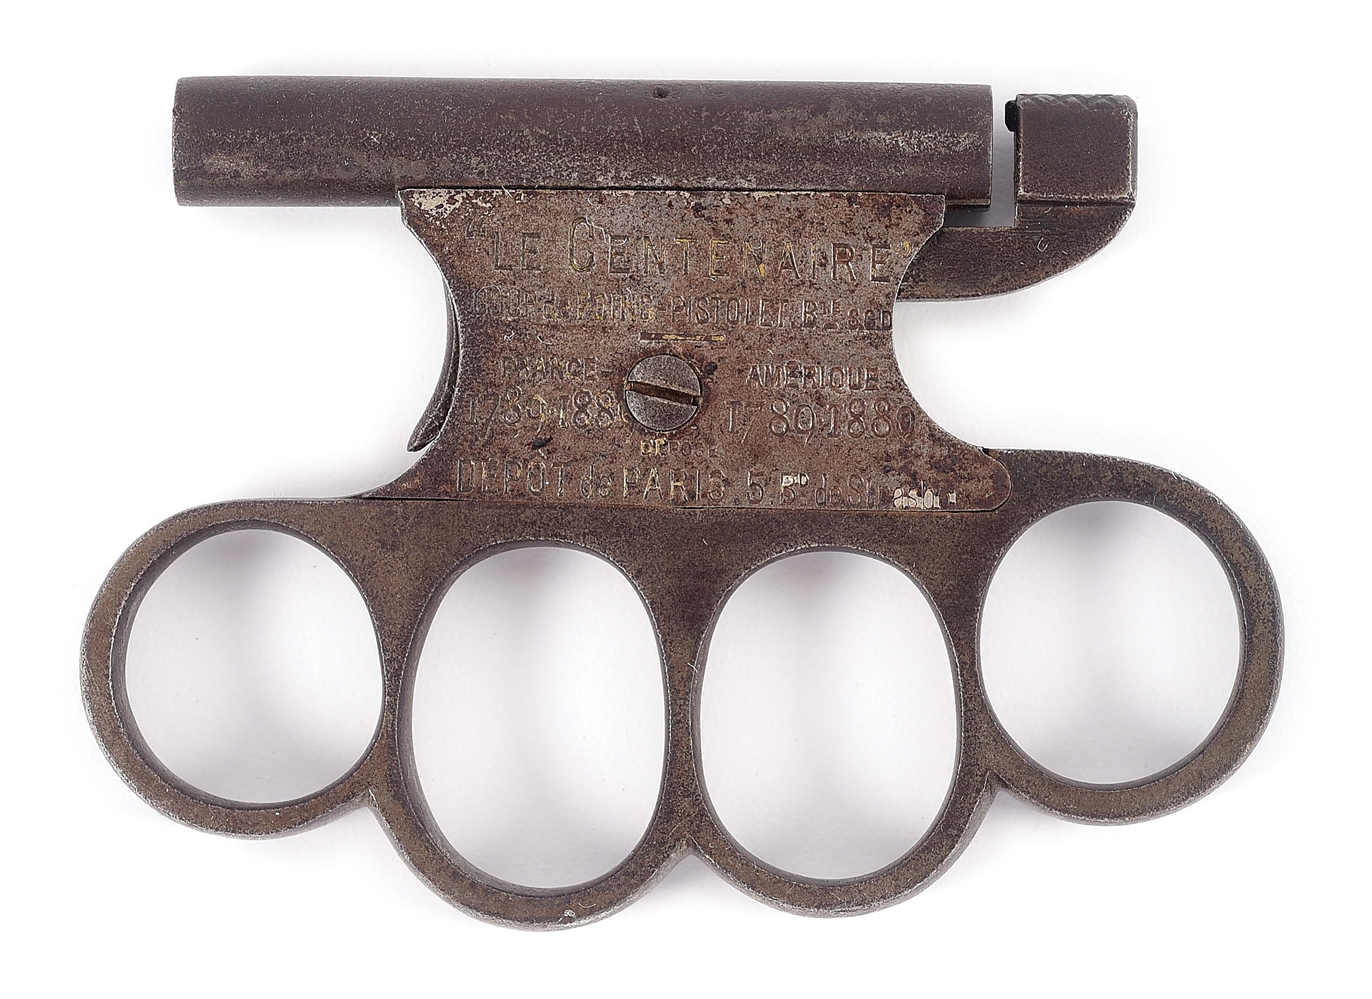 (A) FRENCH "LE CENTENAIRE" SINGLE SHOT KNUCKLE DUSTER PISTOL WITH CONTEMPORARY BOX. 